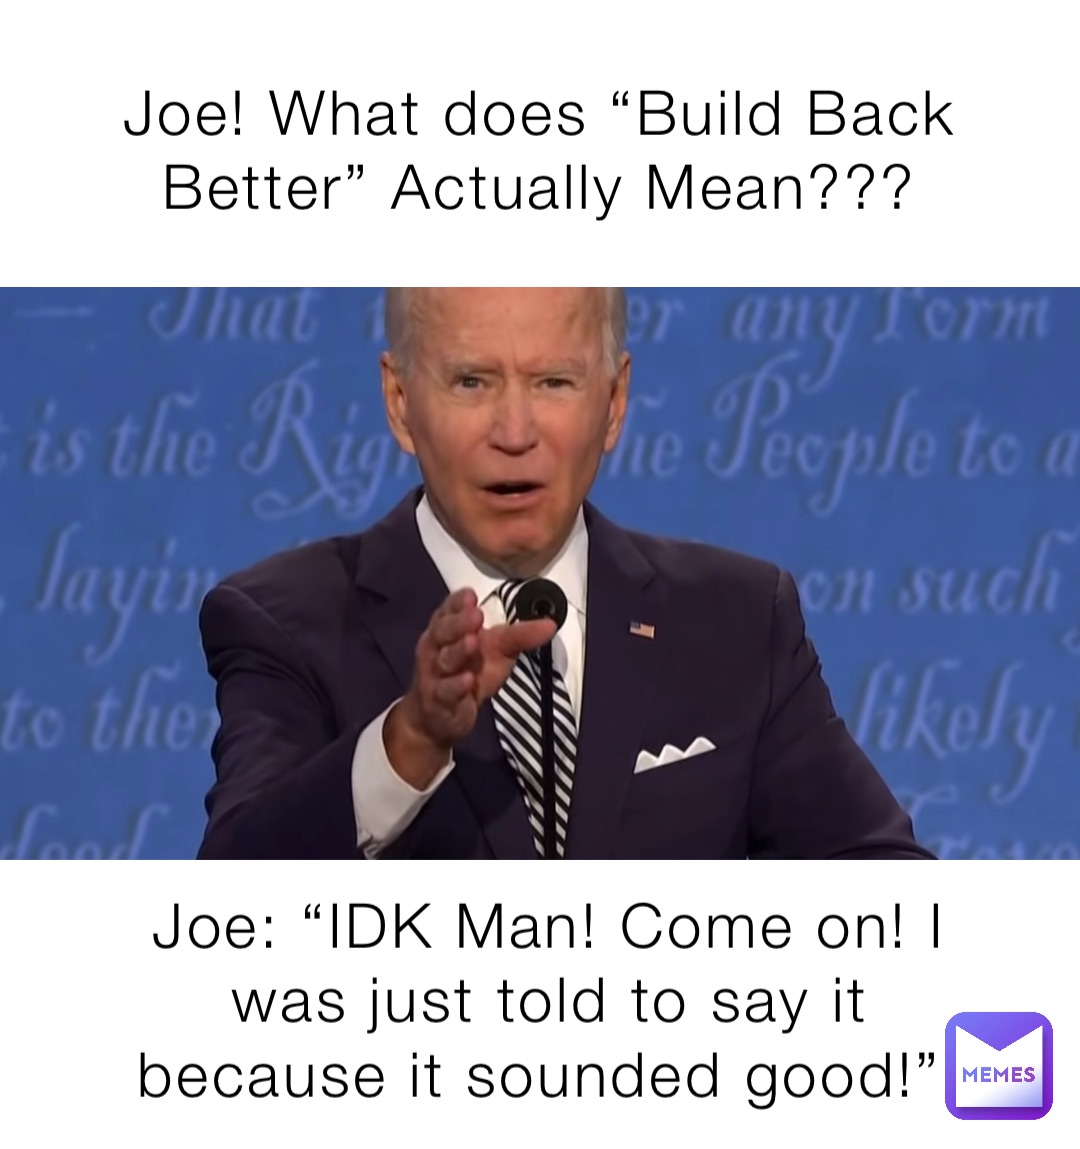 Joe! What does “Build Back Better” Actually Mean??? Joe: “IDK Man! Come on! I was just told to say it because it sounded good!”